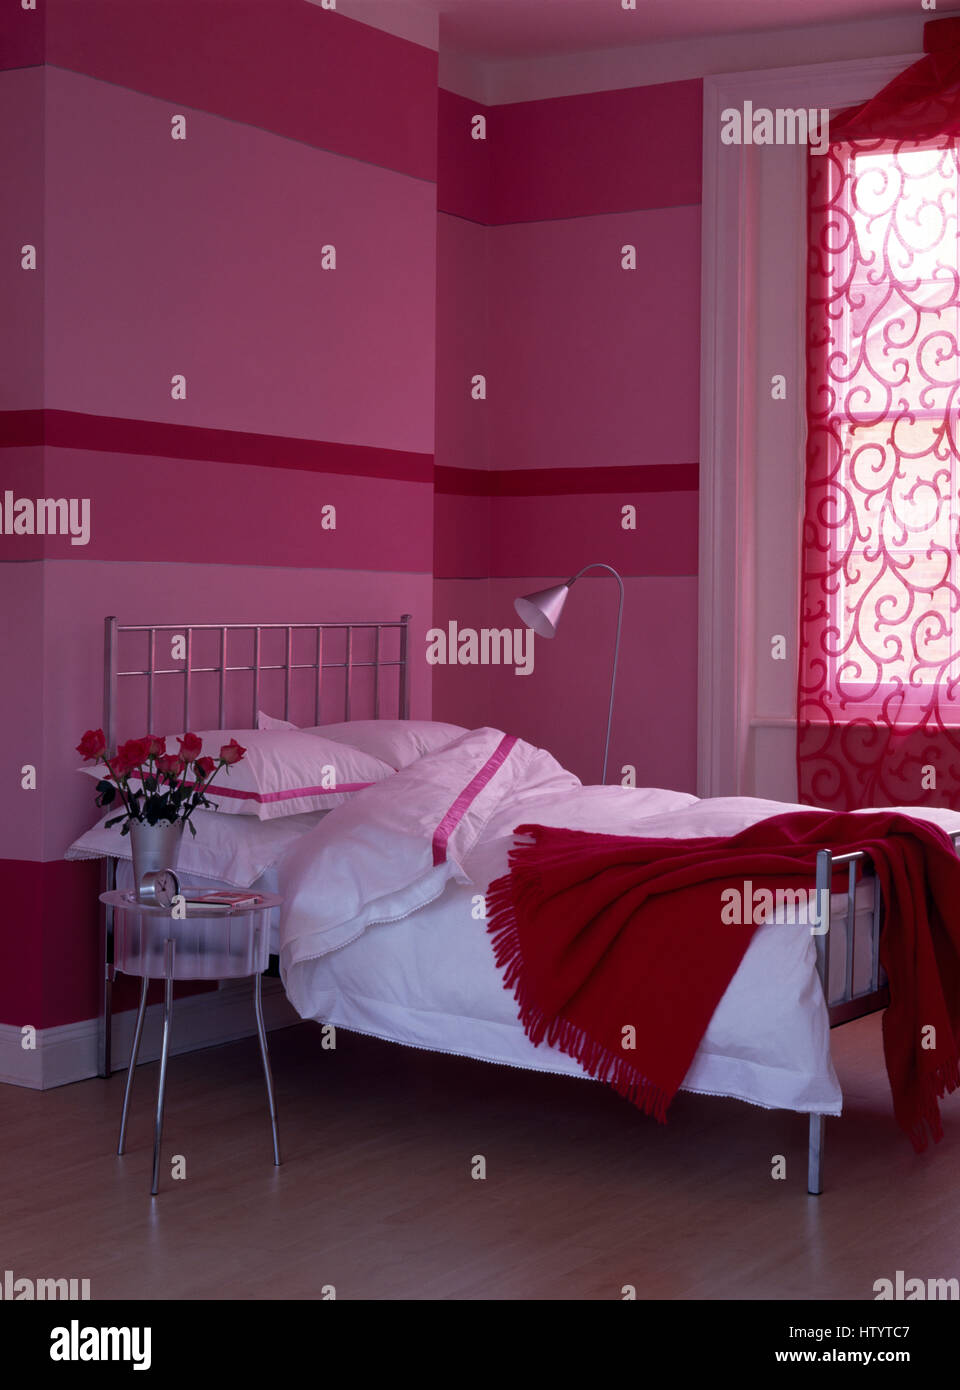 Wall painted in horizontal stripes in a pink economy style bedroom with a  red wool throw and white bedlinen on the bed Stock Photo - Alamy